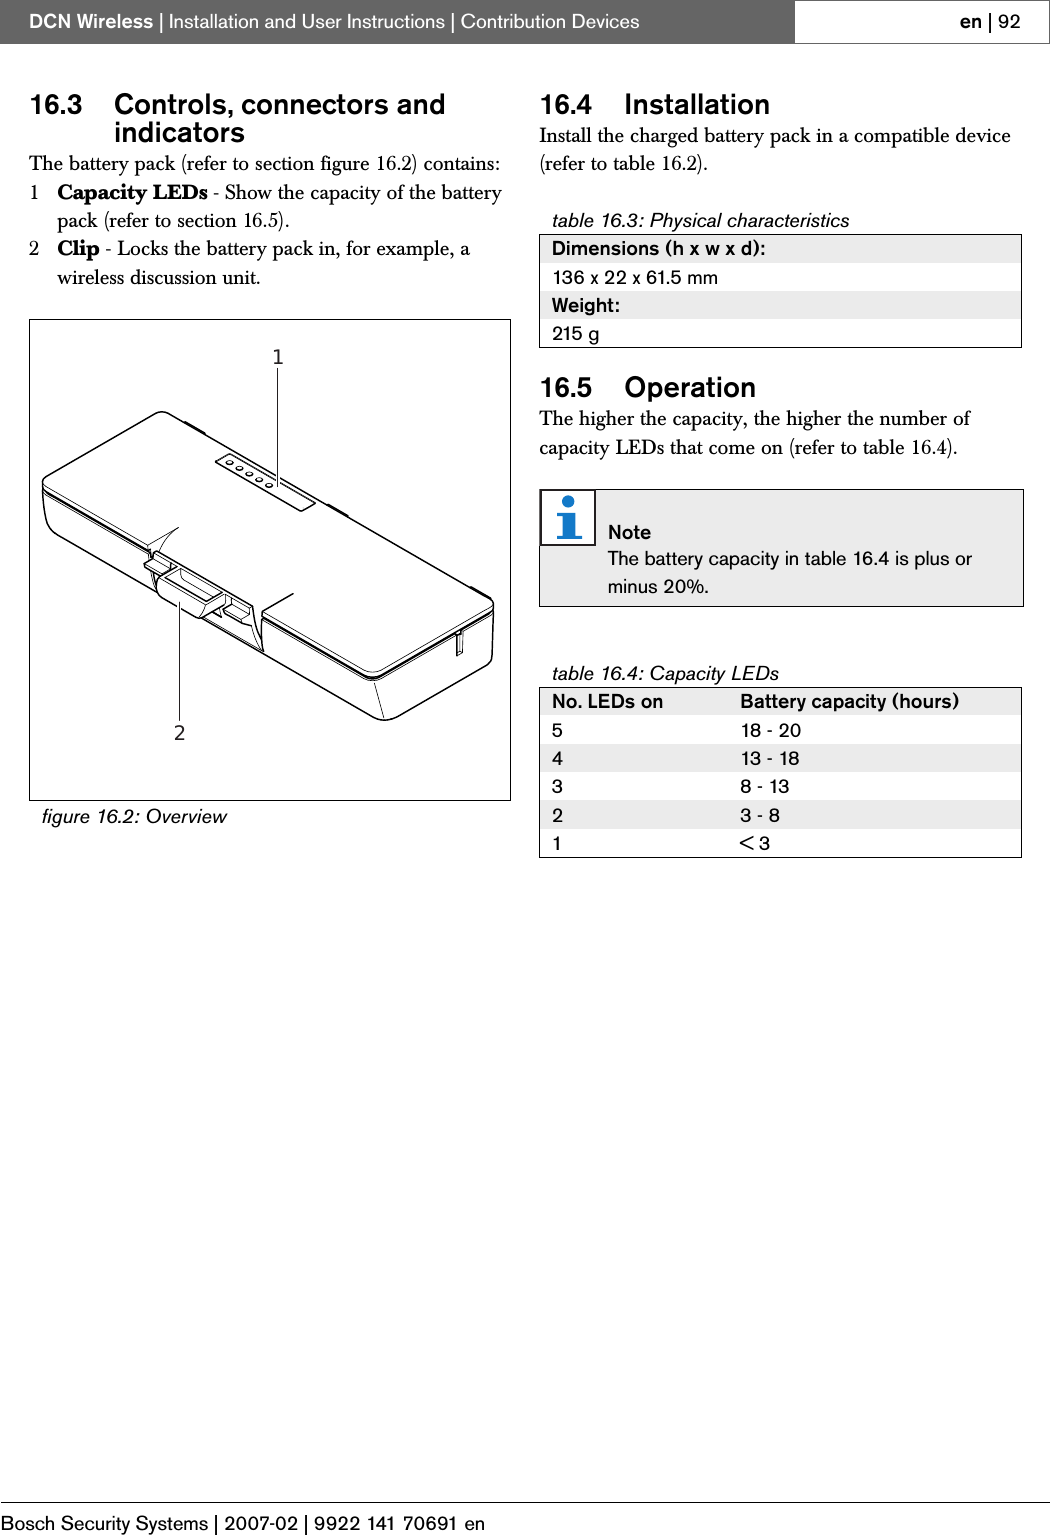 Page 63 of Bosch Security Systems DCNWAP Wireless Access Point User Manual Part 2